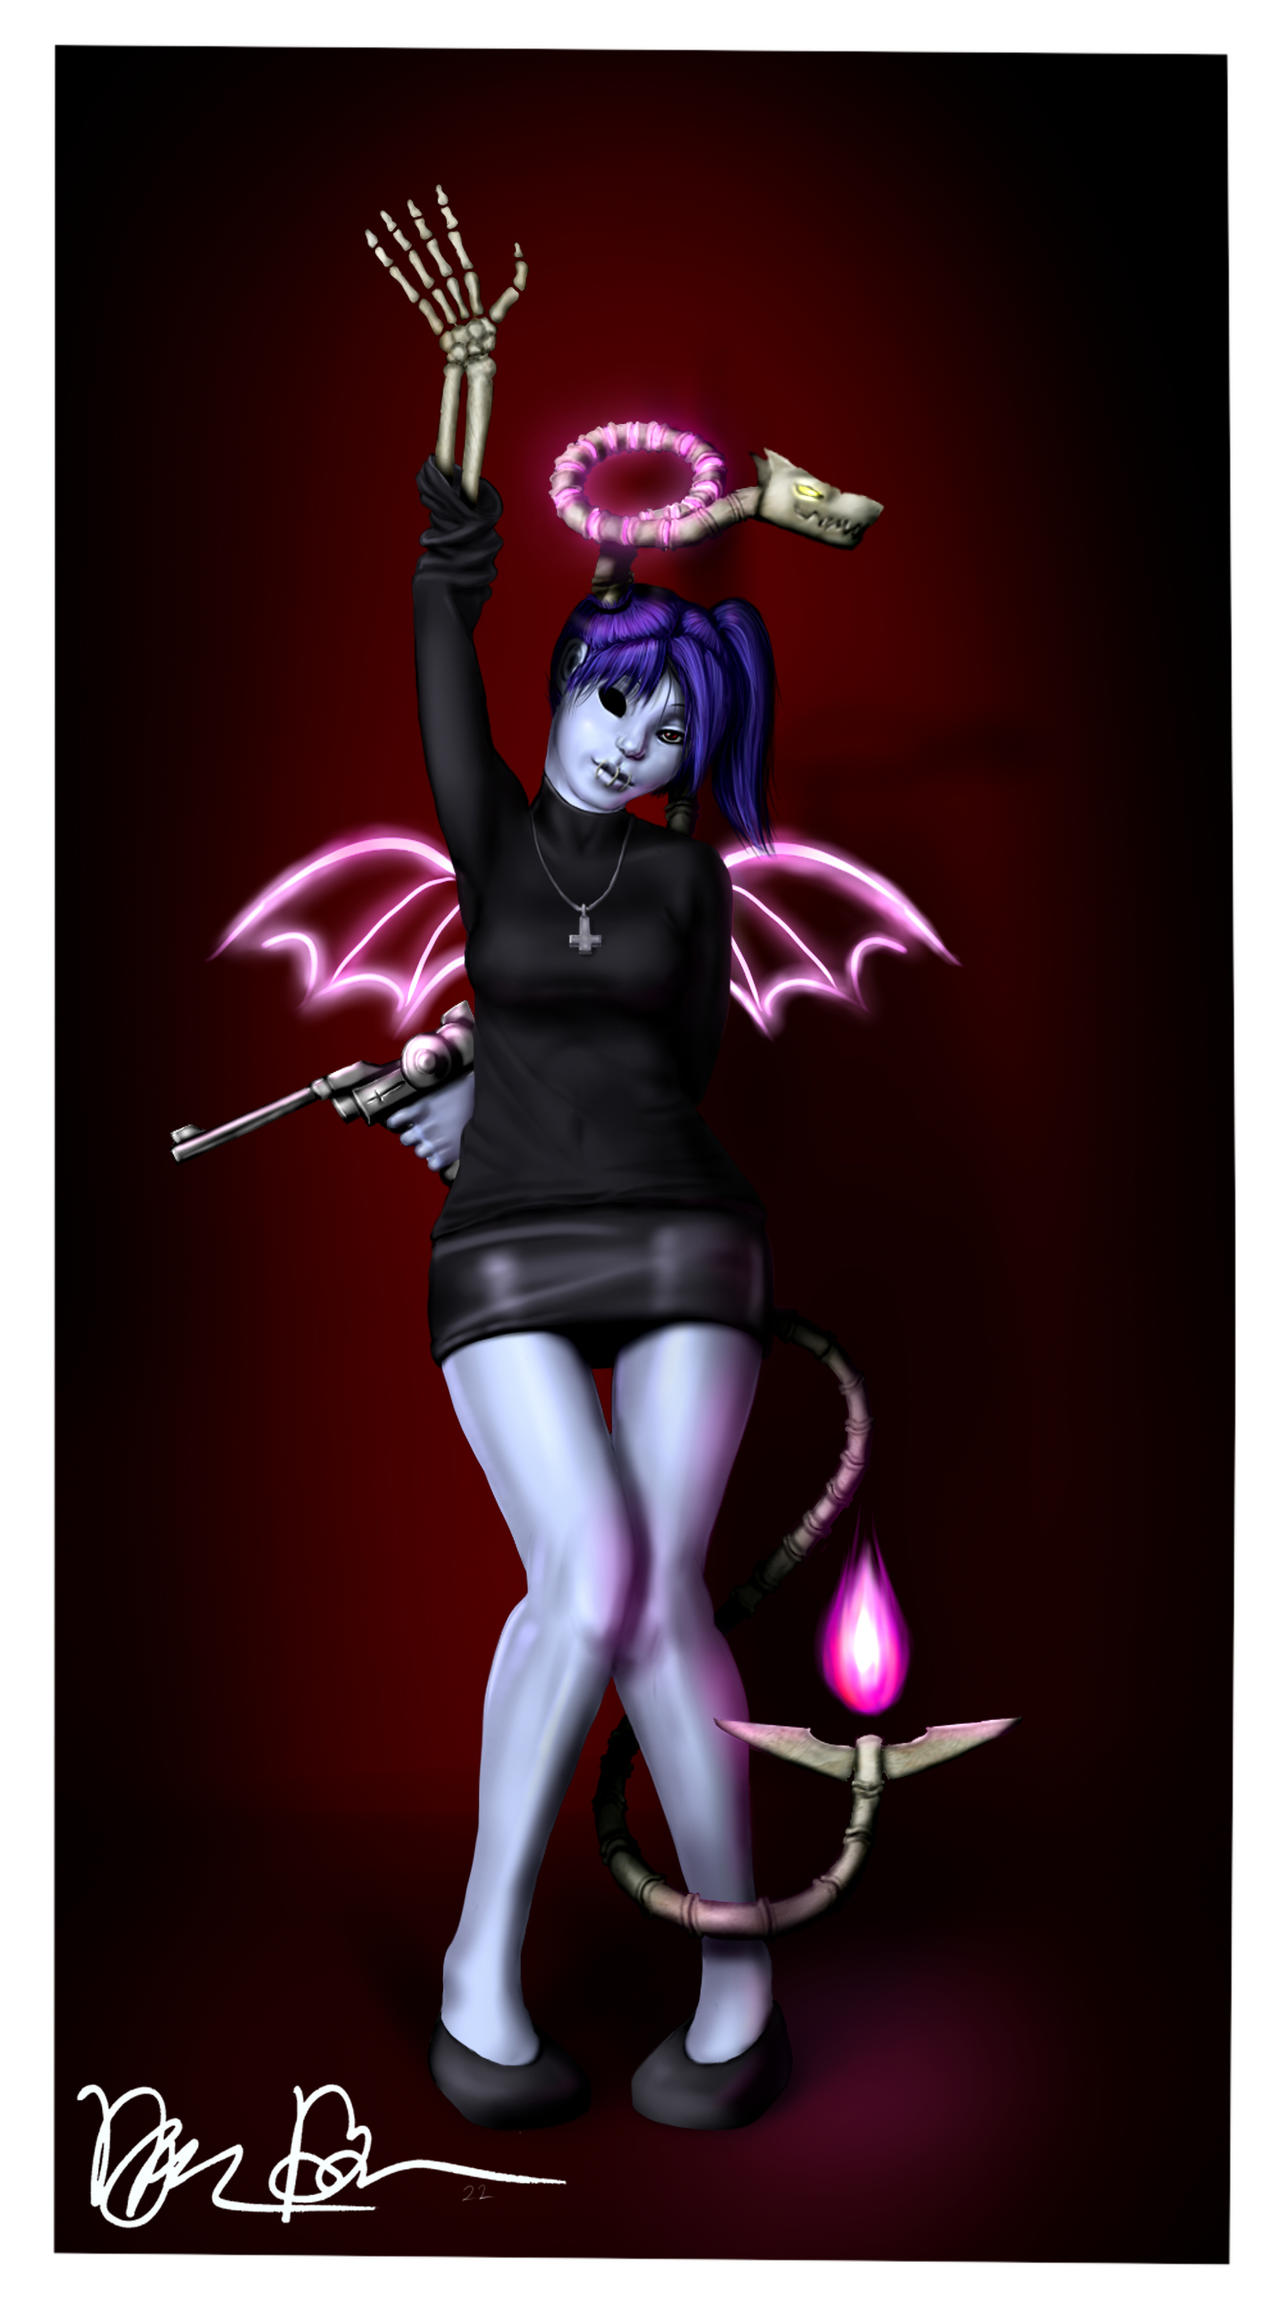 squigly_card_1_clothes_swap_by_drsusredfish-d6nxfx5.jpg